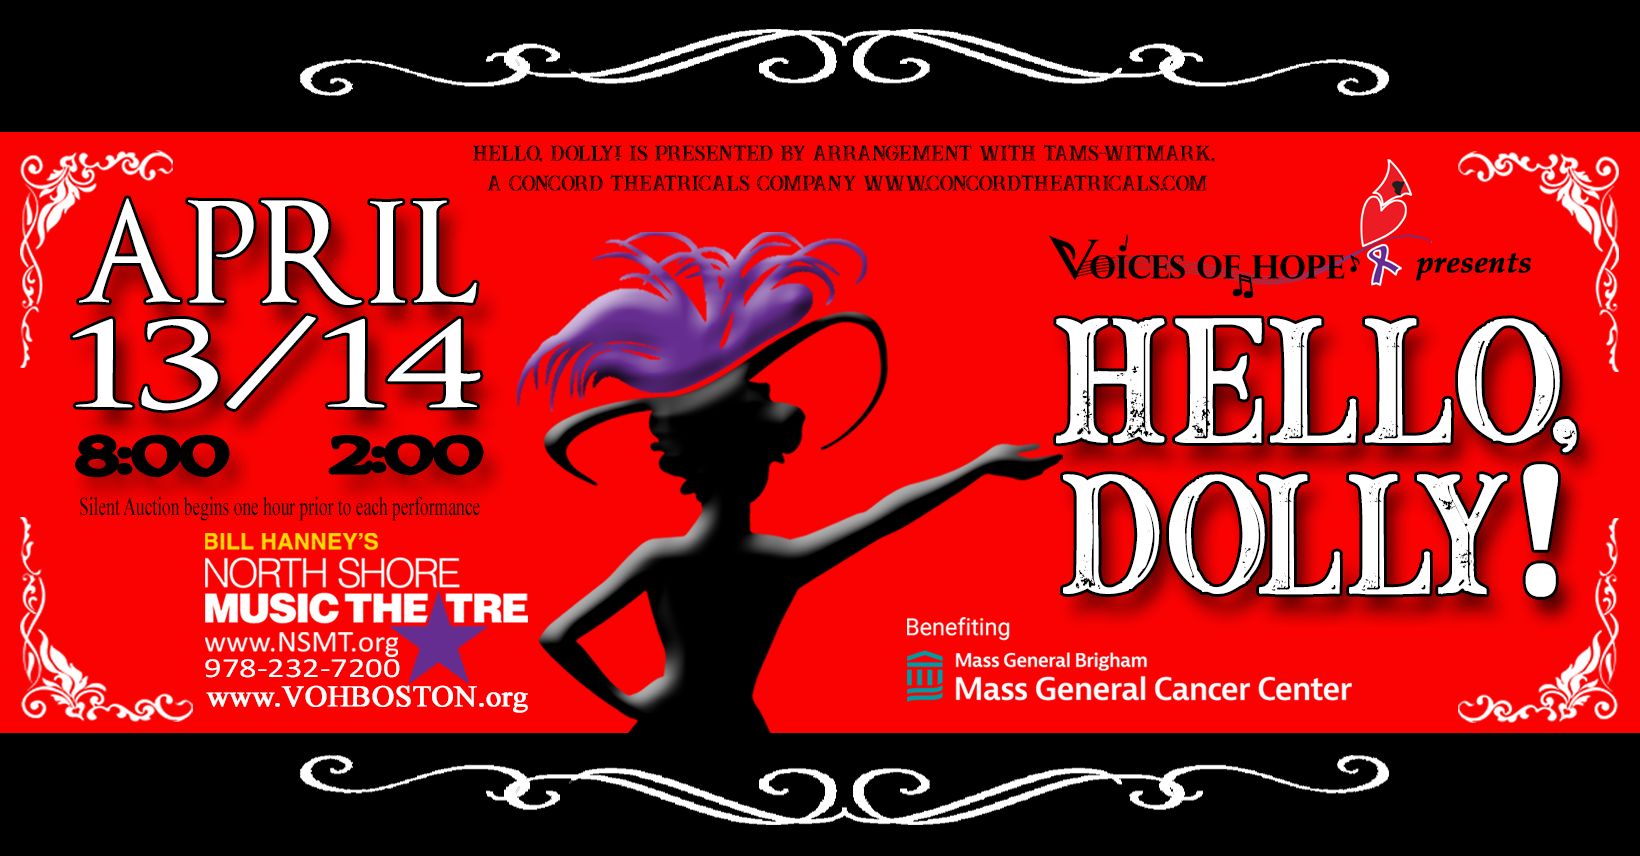 Get ready to tap your feet to the tunes of the acclaimed musical "Hello, Dolly!" Check out performance schedules, set your calendars and be part of a magical night. But that's not all - you also get a chance to give back as each ticket purchase supports a noble cause. Get details regarding our beneficiaries - because making a difference while having fun is what we believe in.